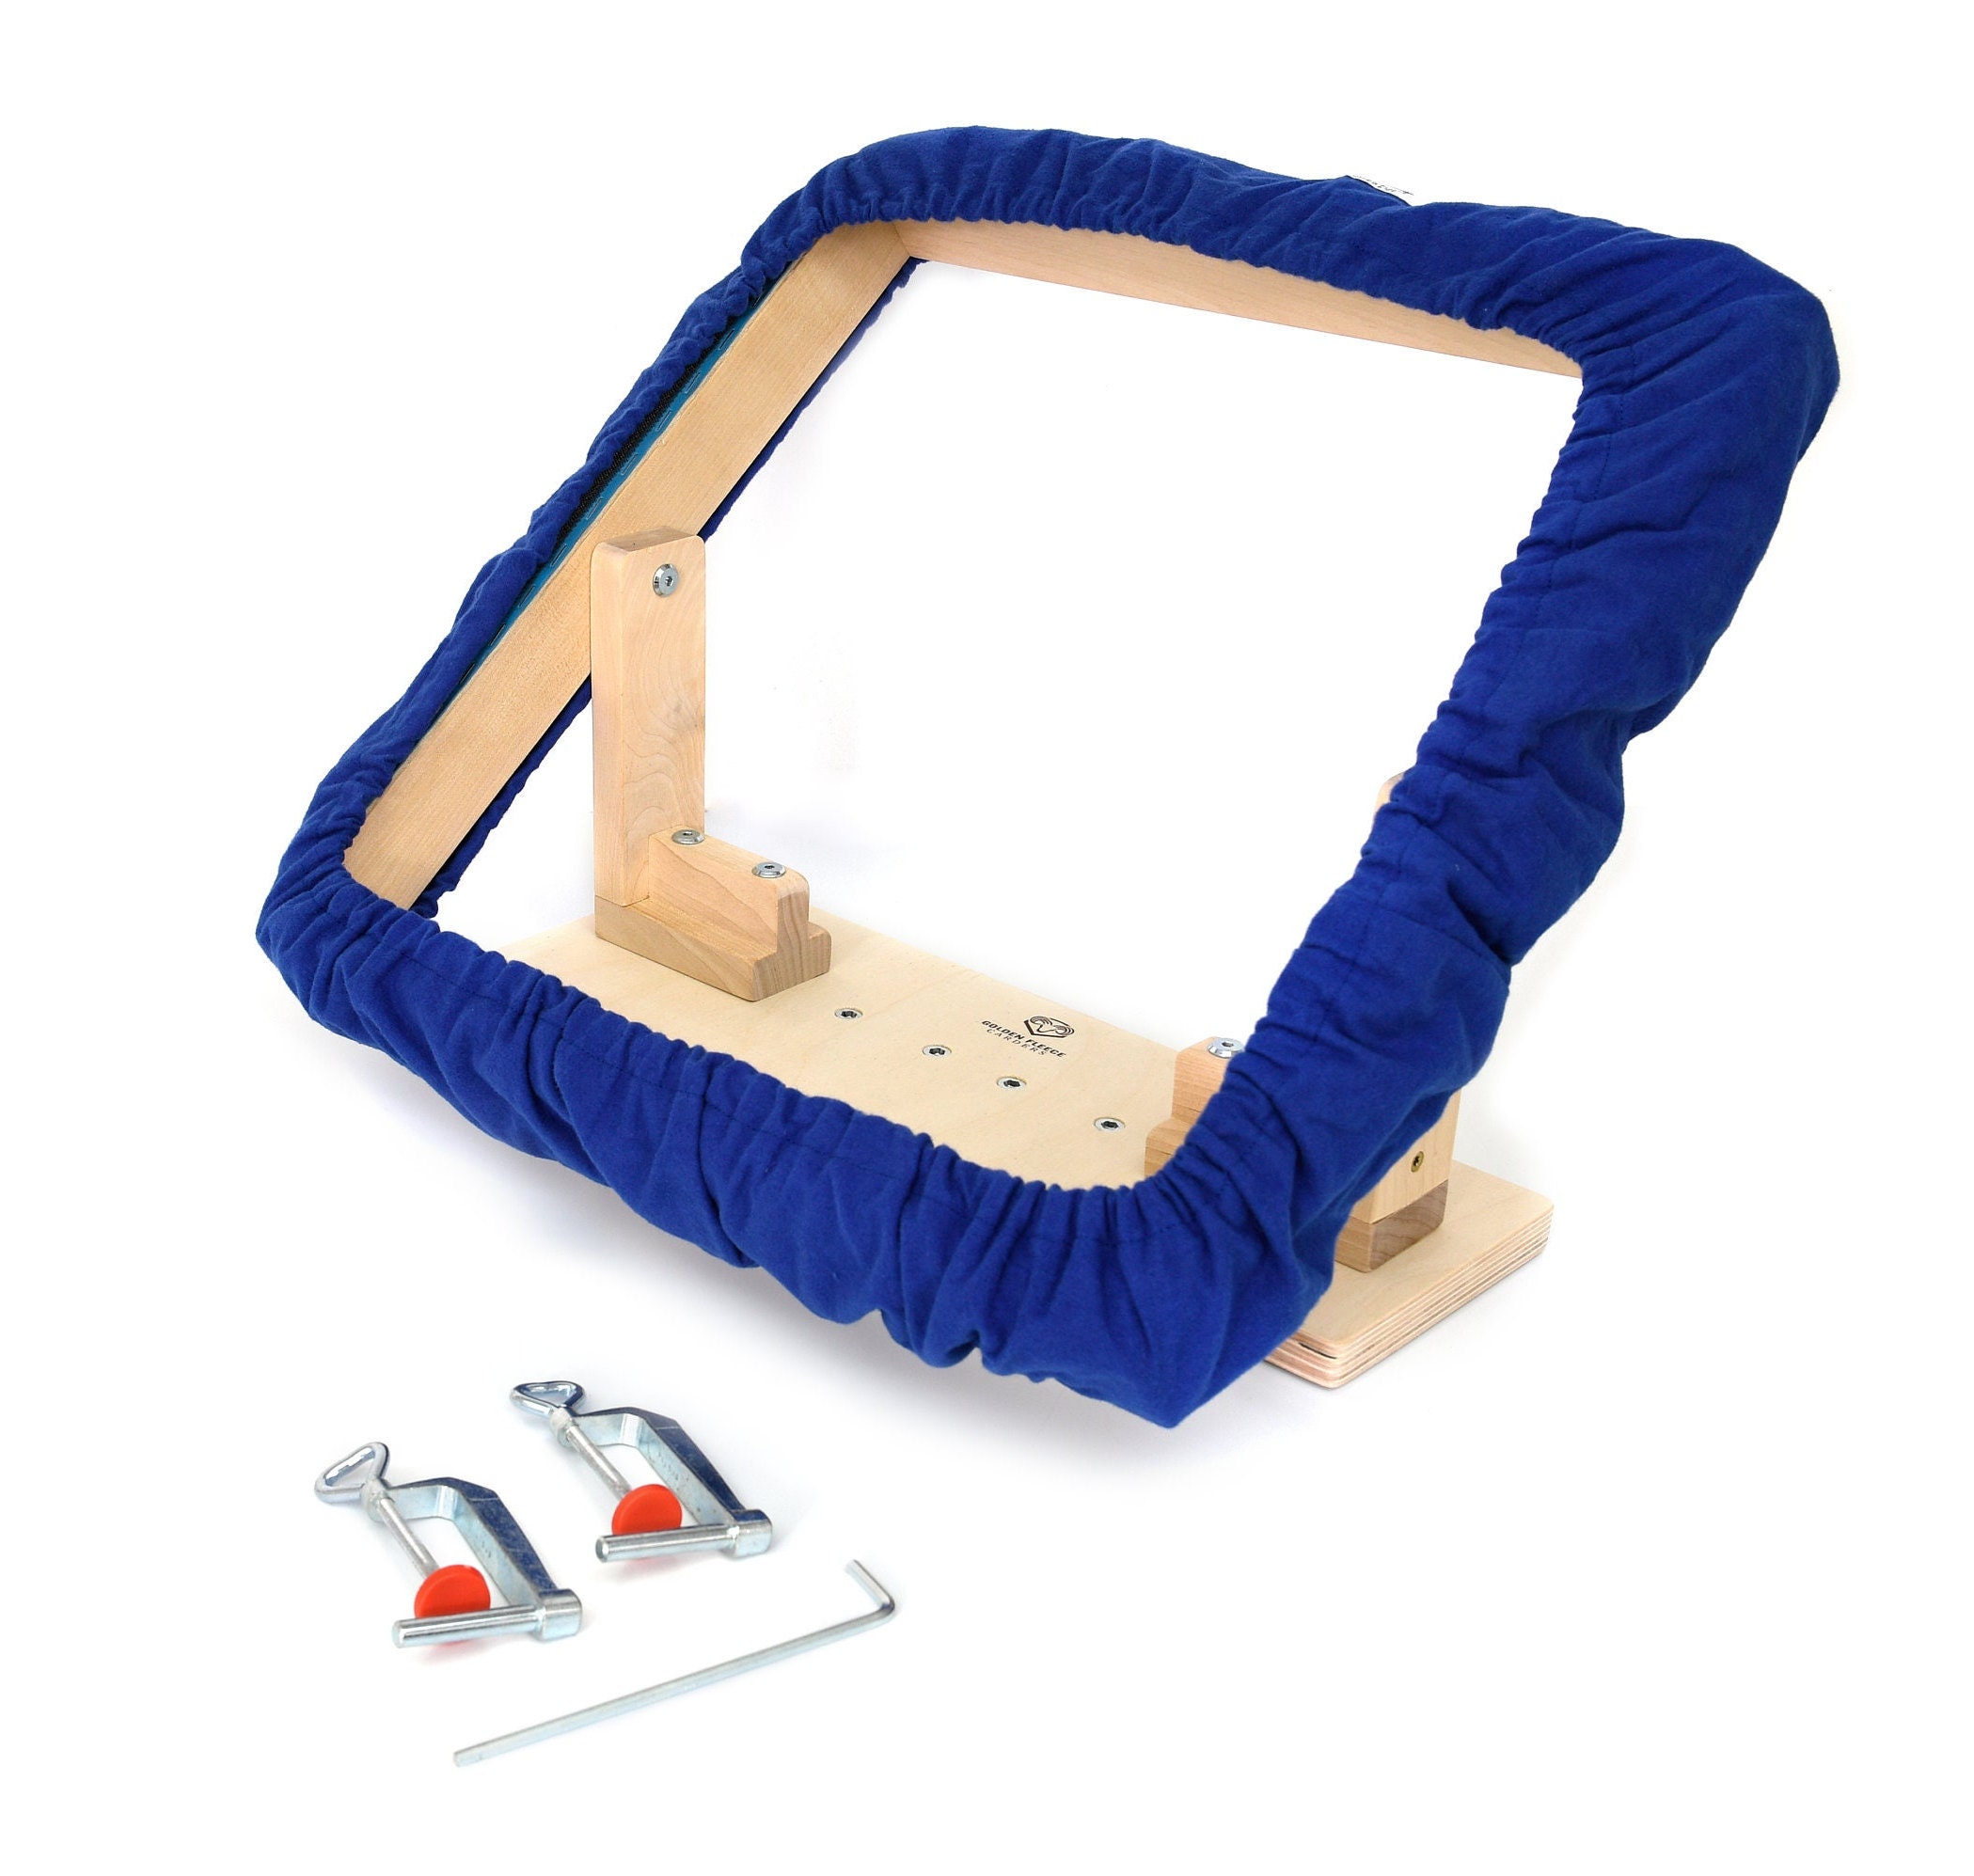 Tufting Frame With Yarn Holders, MEDIUM 33X30 Table Top Rug Tufting Frame,  Easy to Assemble Rug Tufting Frame Canada, Punch Needle Frame 